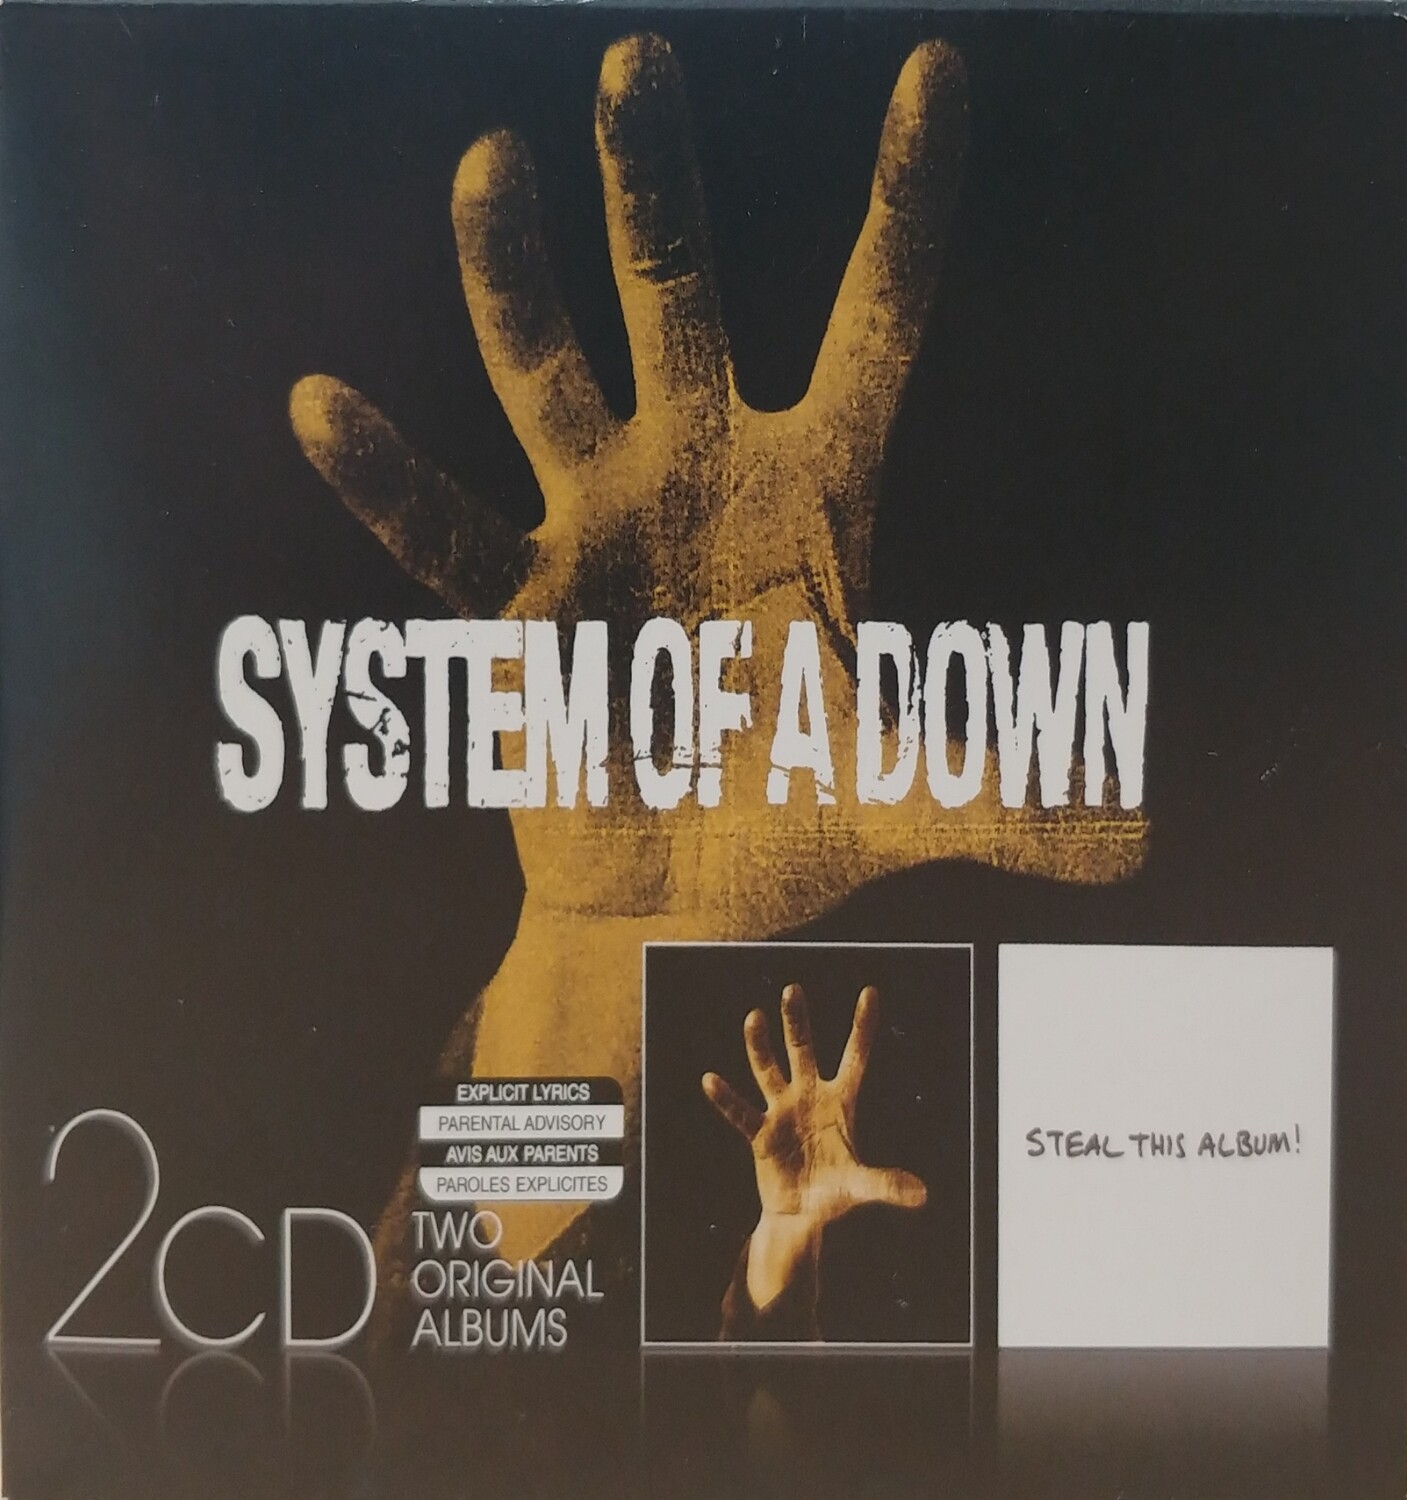 System of a down - System of a down & Steal This Album